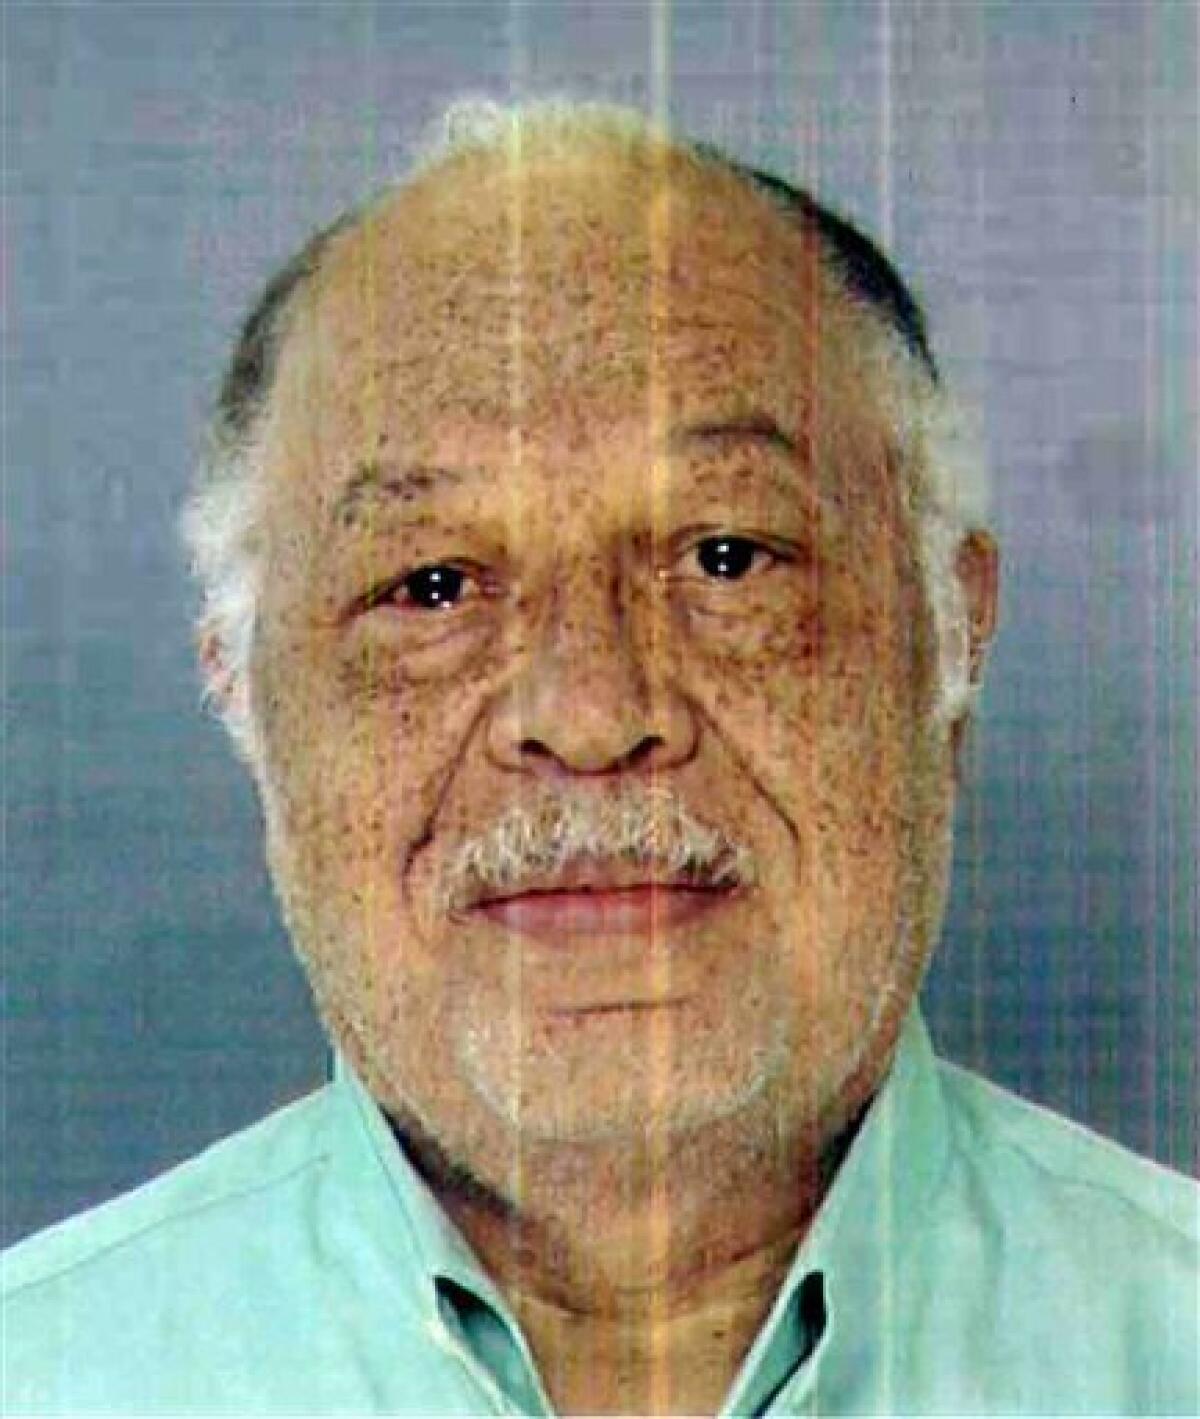 In this undated photo released by the Philadelphia District Attorney's office, Dr. Kermit Gosnell is shown. Gosnell, 69, a family practice physician, was arraigned Thursday, Jan. 20 2011, on eight counts of murder in the deaths of seven babies and one patient. Nine employees of his Women's Medical Society clinic also have been charged, including four with murder. (AP Photo/Philadelphia Police Department via Philadelphia District Attorney's Office)